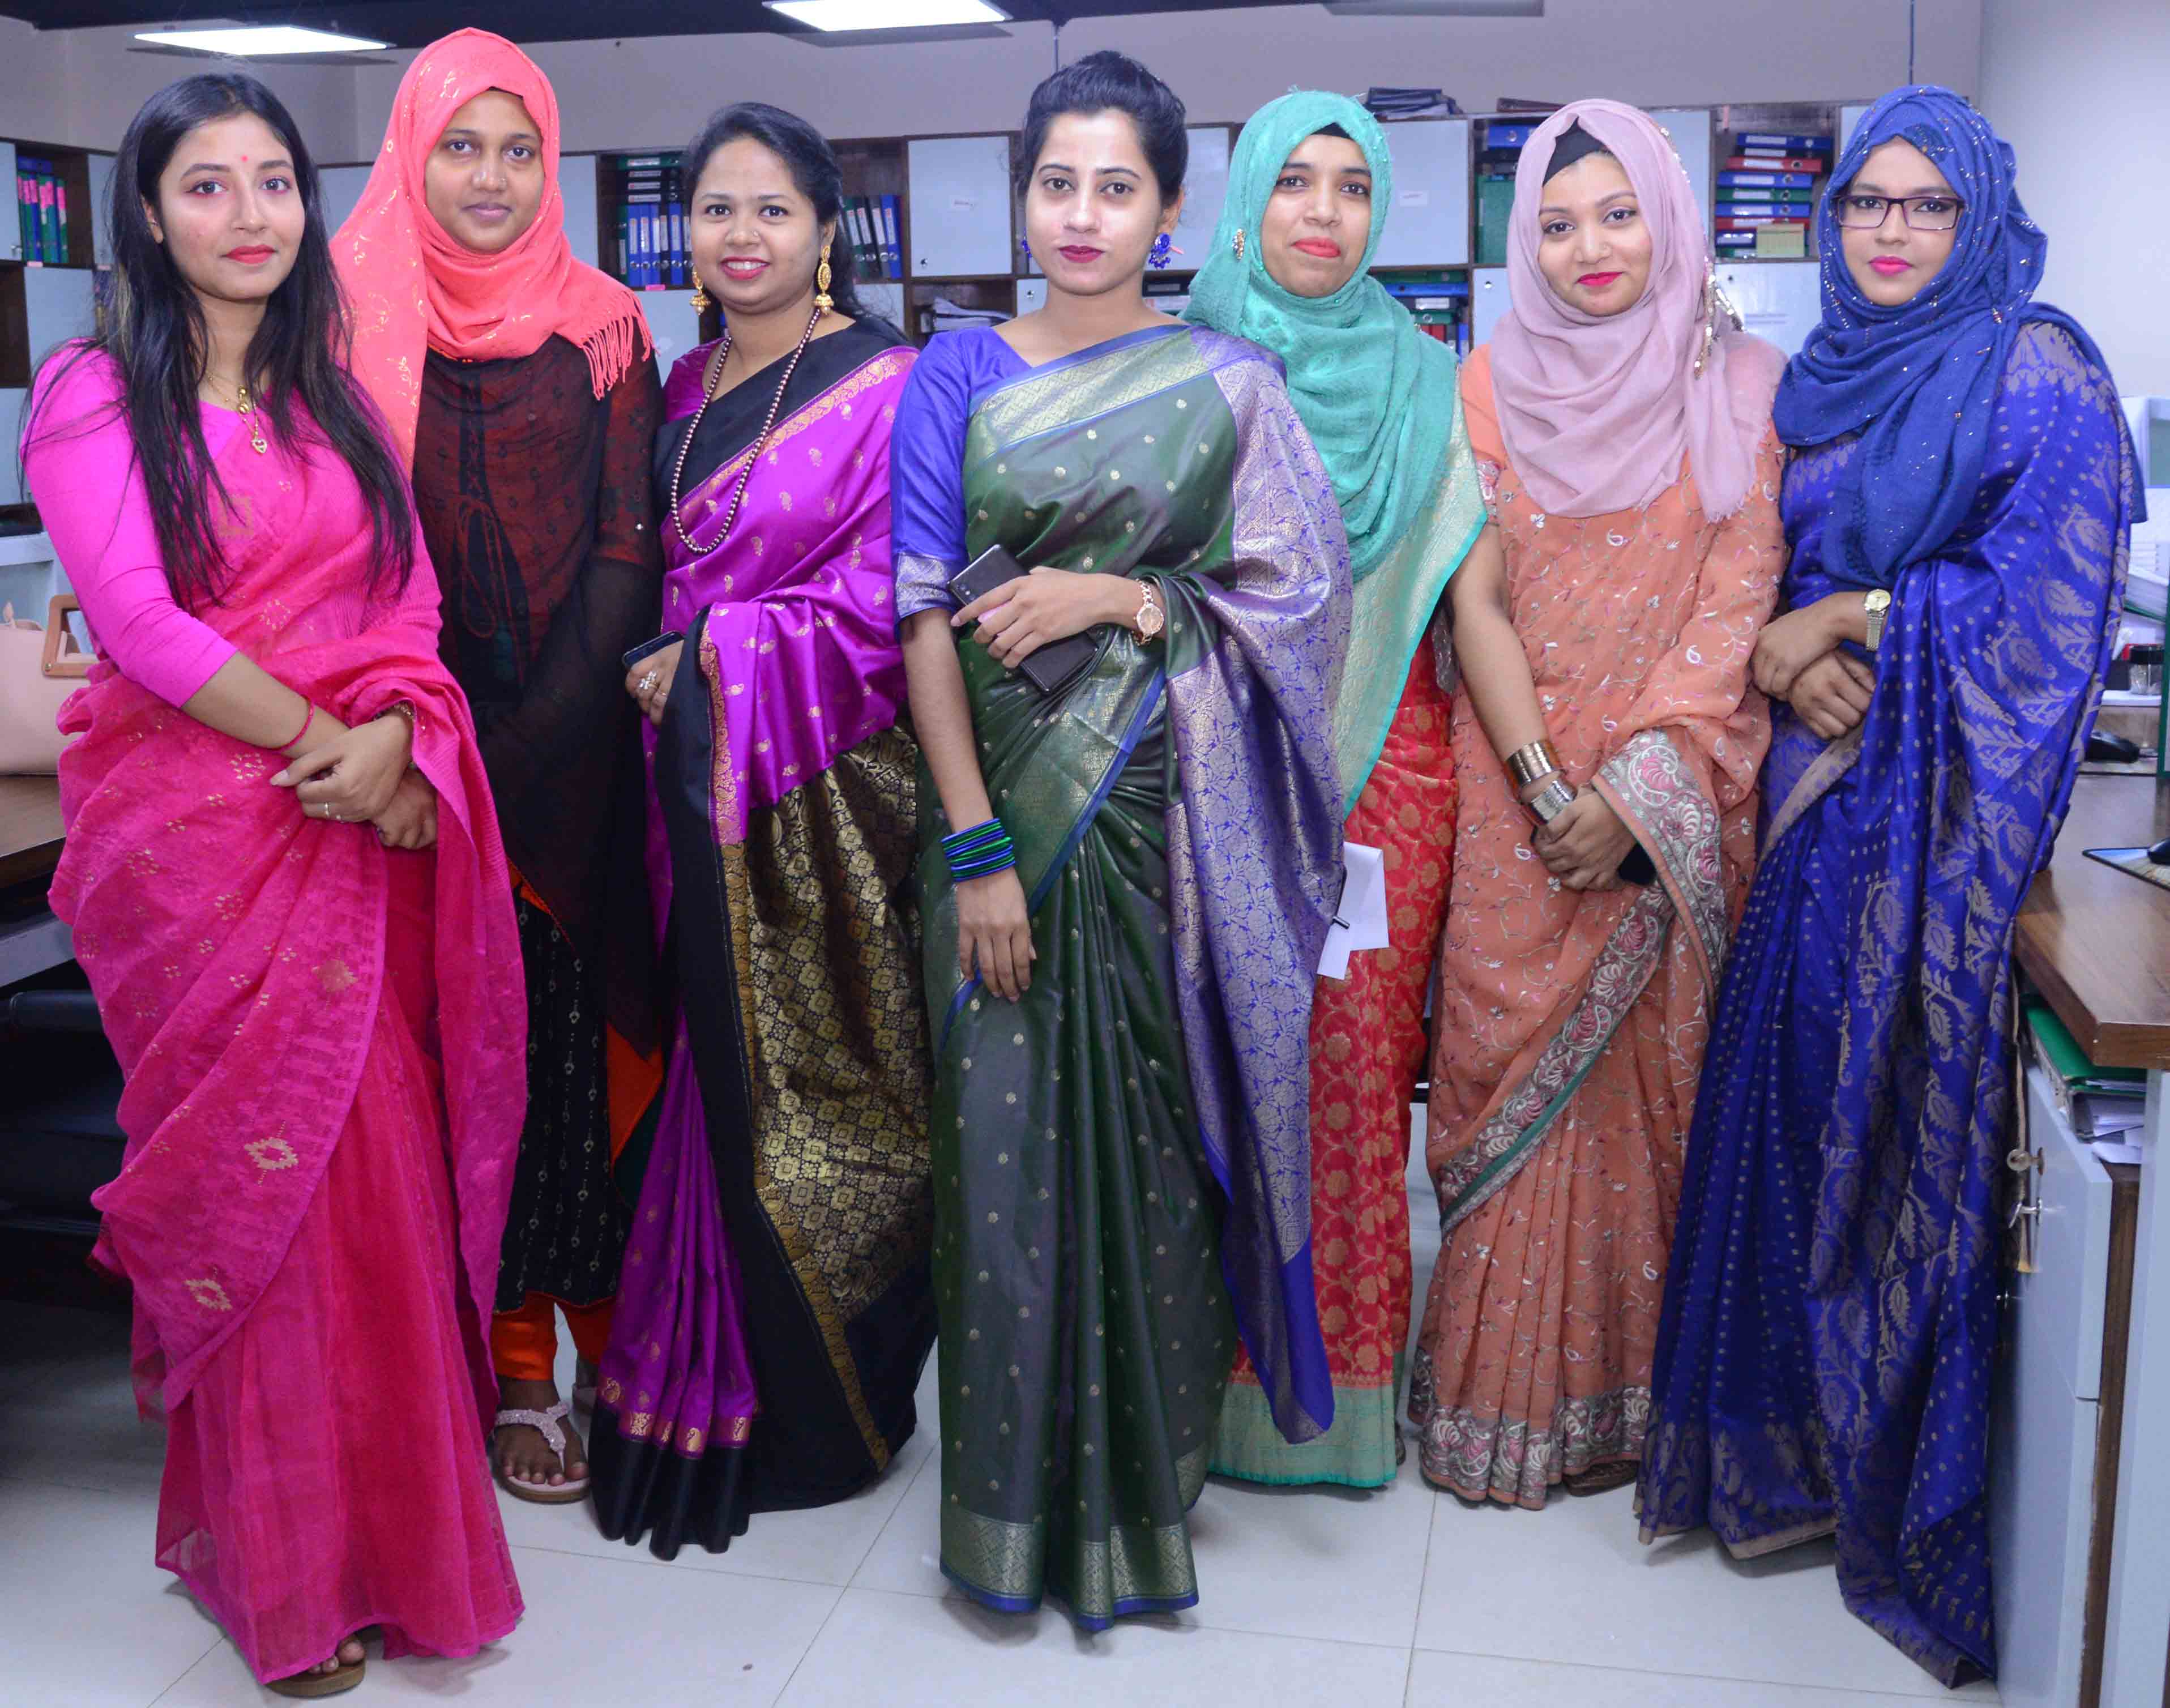 NCR Empowering Women with dignity